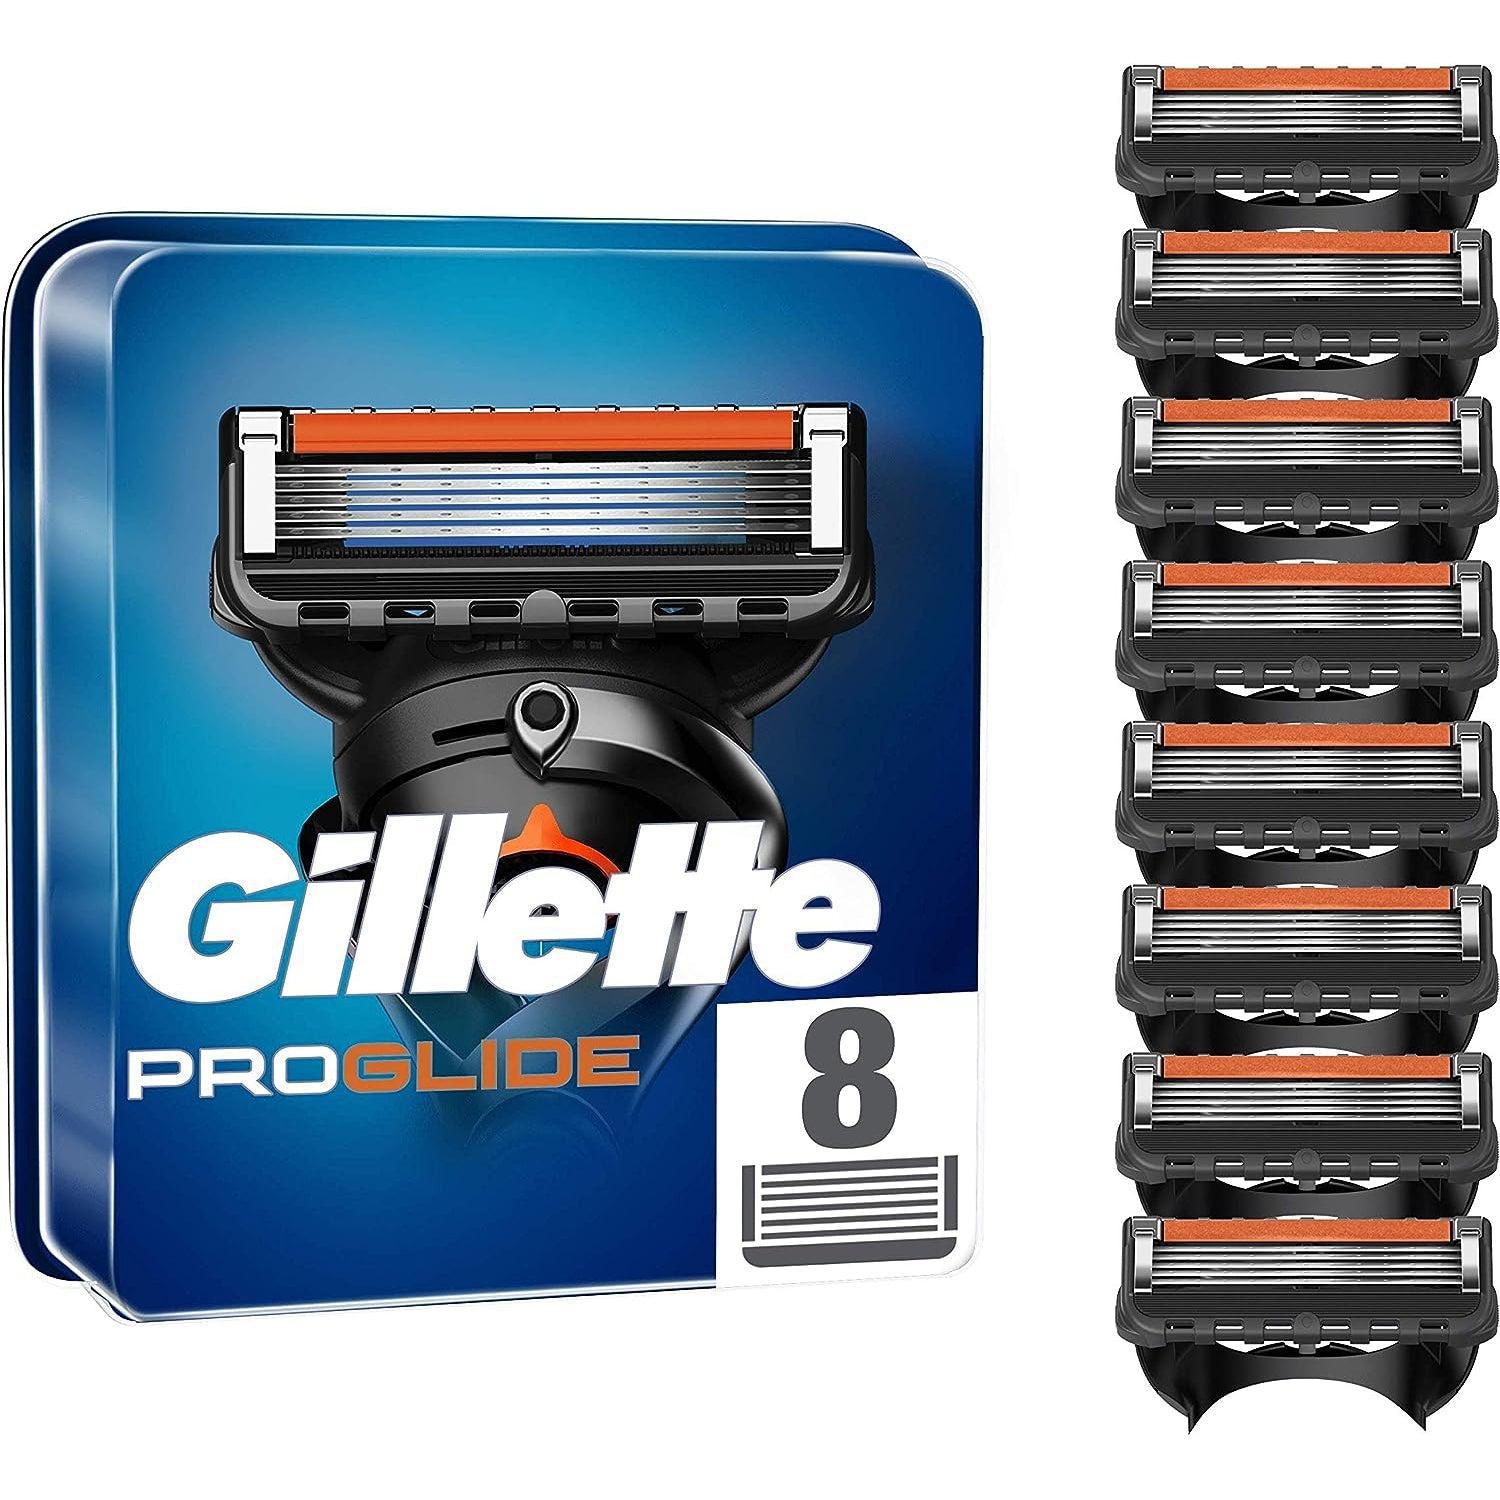 Gillette ProGlide Men’s Razor Blade Refills, 8 Count, with 5 Anti-Friction Blades for a Close, Long-Lasting Shave